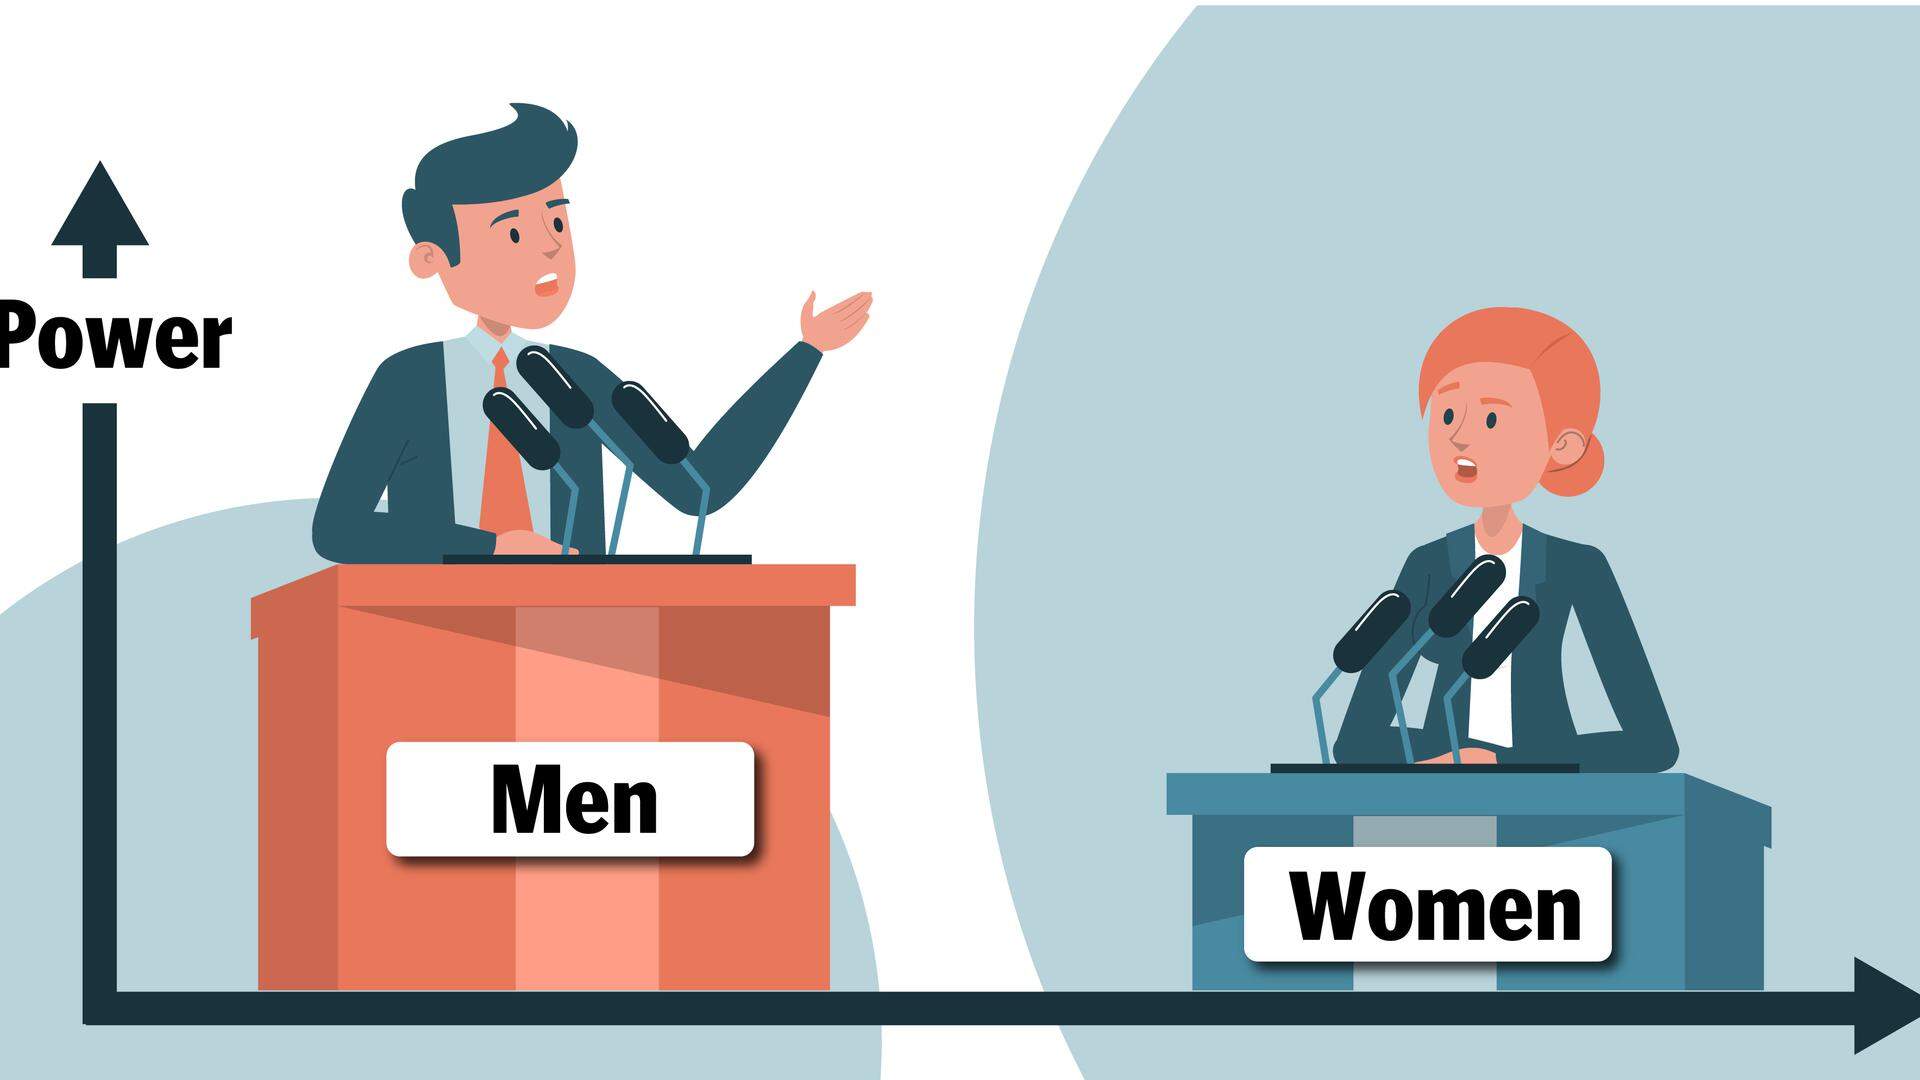 Women are still outnumbered in decision-making positions